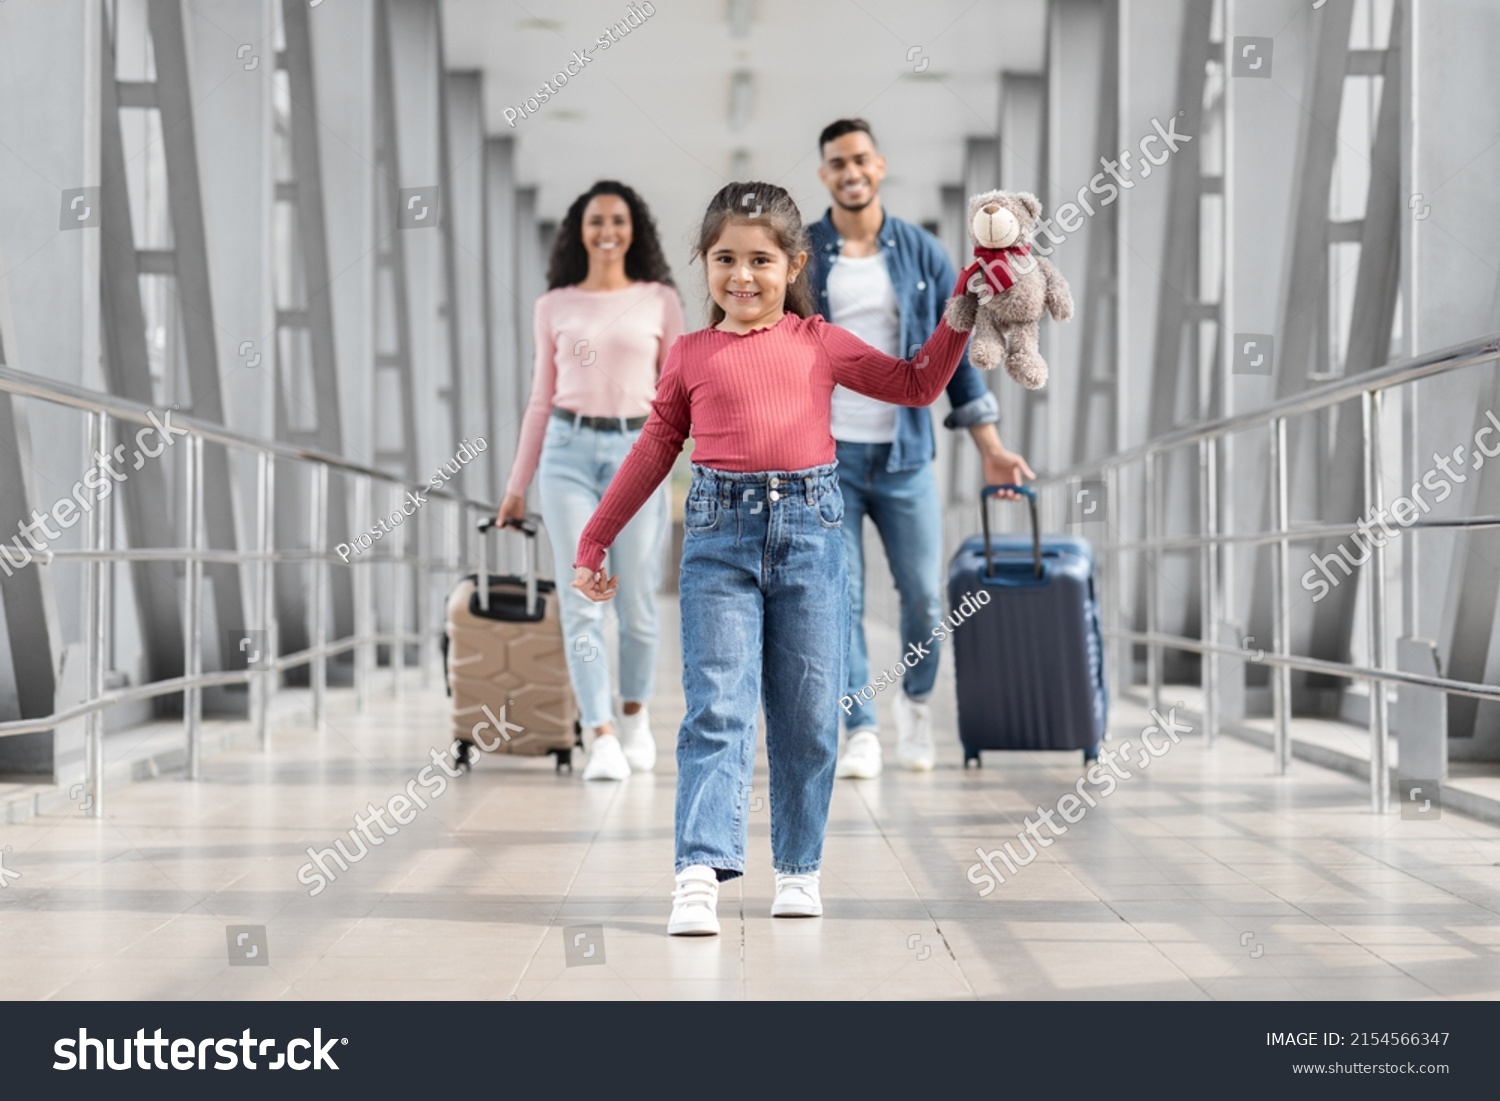 Portrait Of Joyful Cute Middle Eastern Girl Walking At Airport With Parents, Happy Young Arabic Family Ready For Vacation Trip Together, Going To Departure Gate At Terminal, Selective Focus On Kid #2154566347